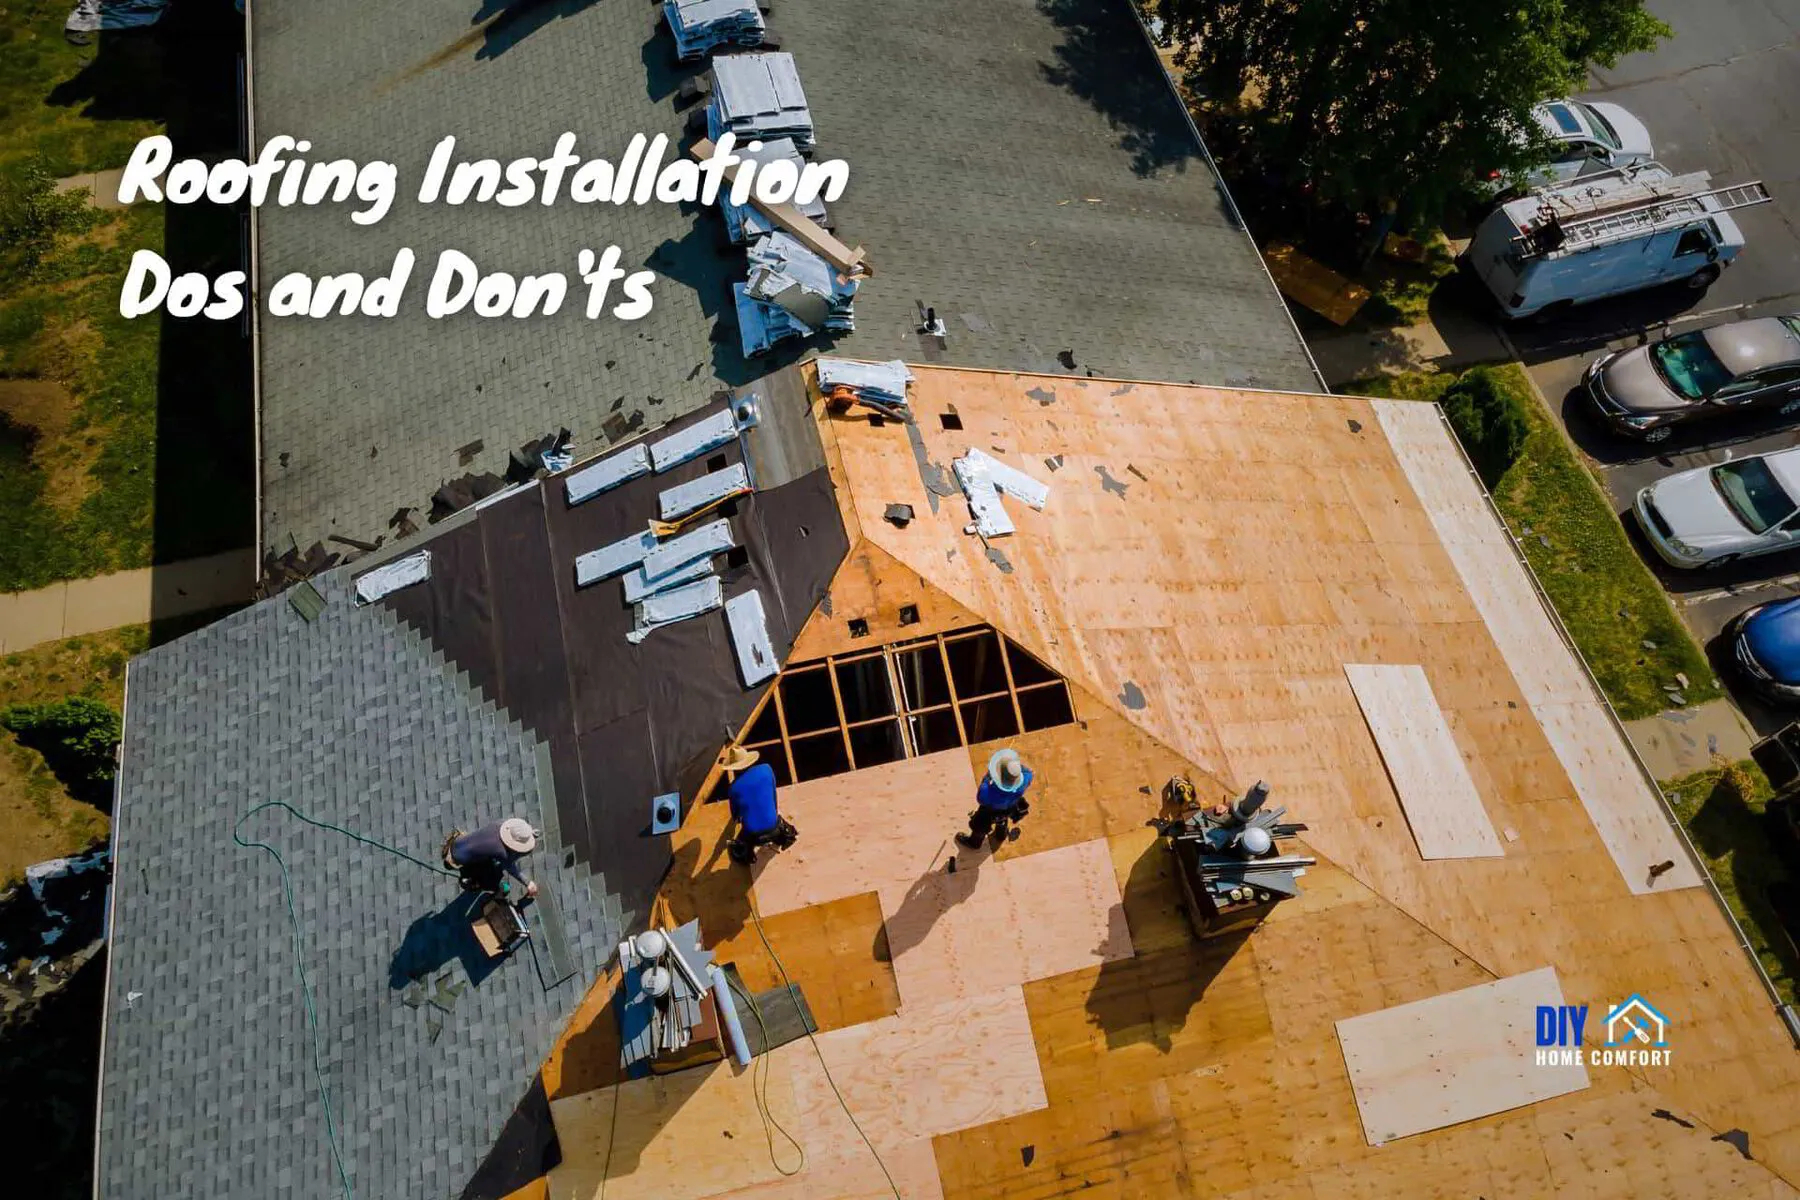 Roofing Installation Dos and Don'ts: Common Mistakes to Avoid | DIY Home Comfort